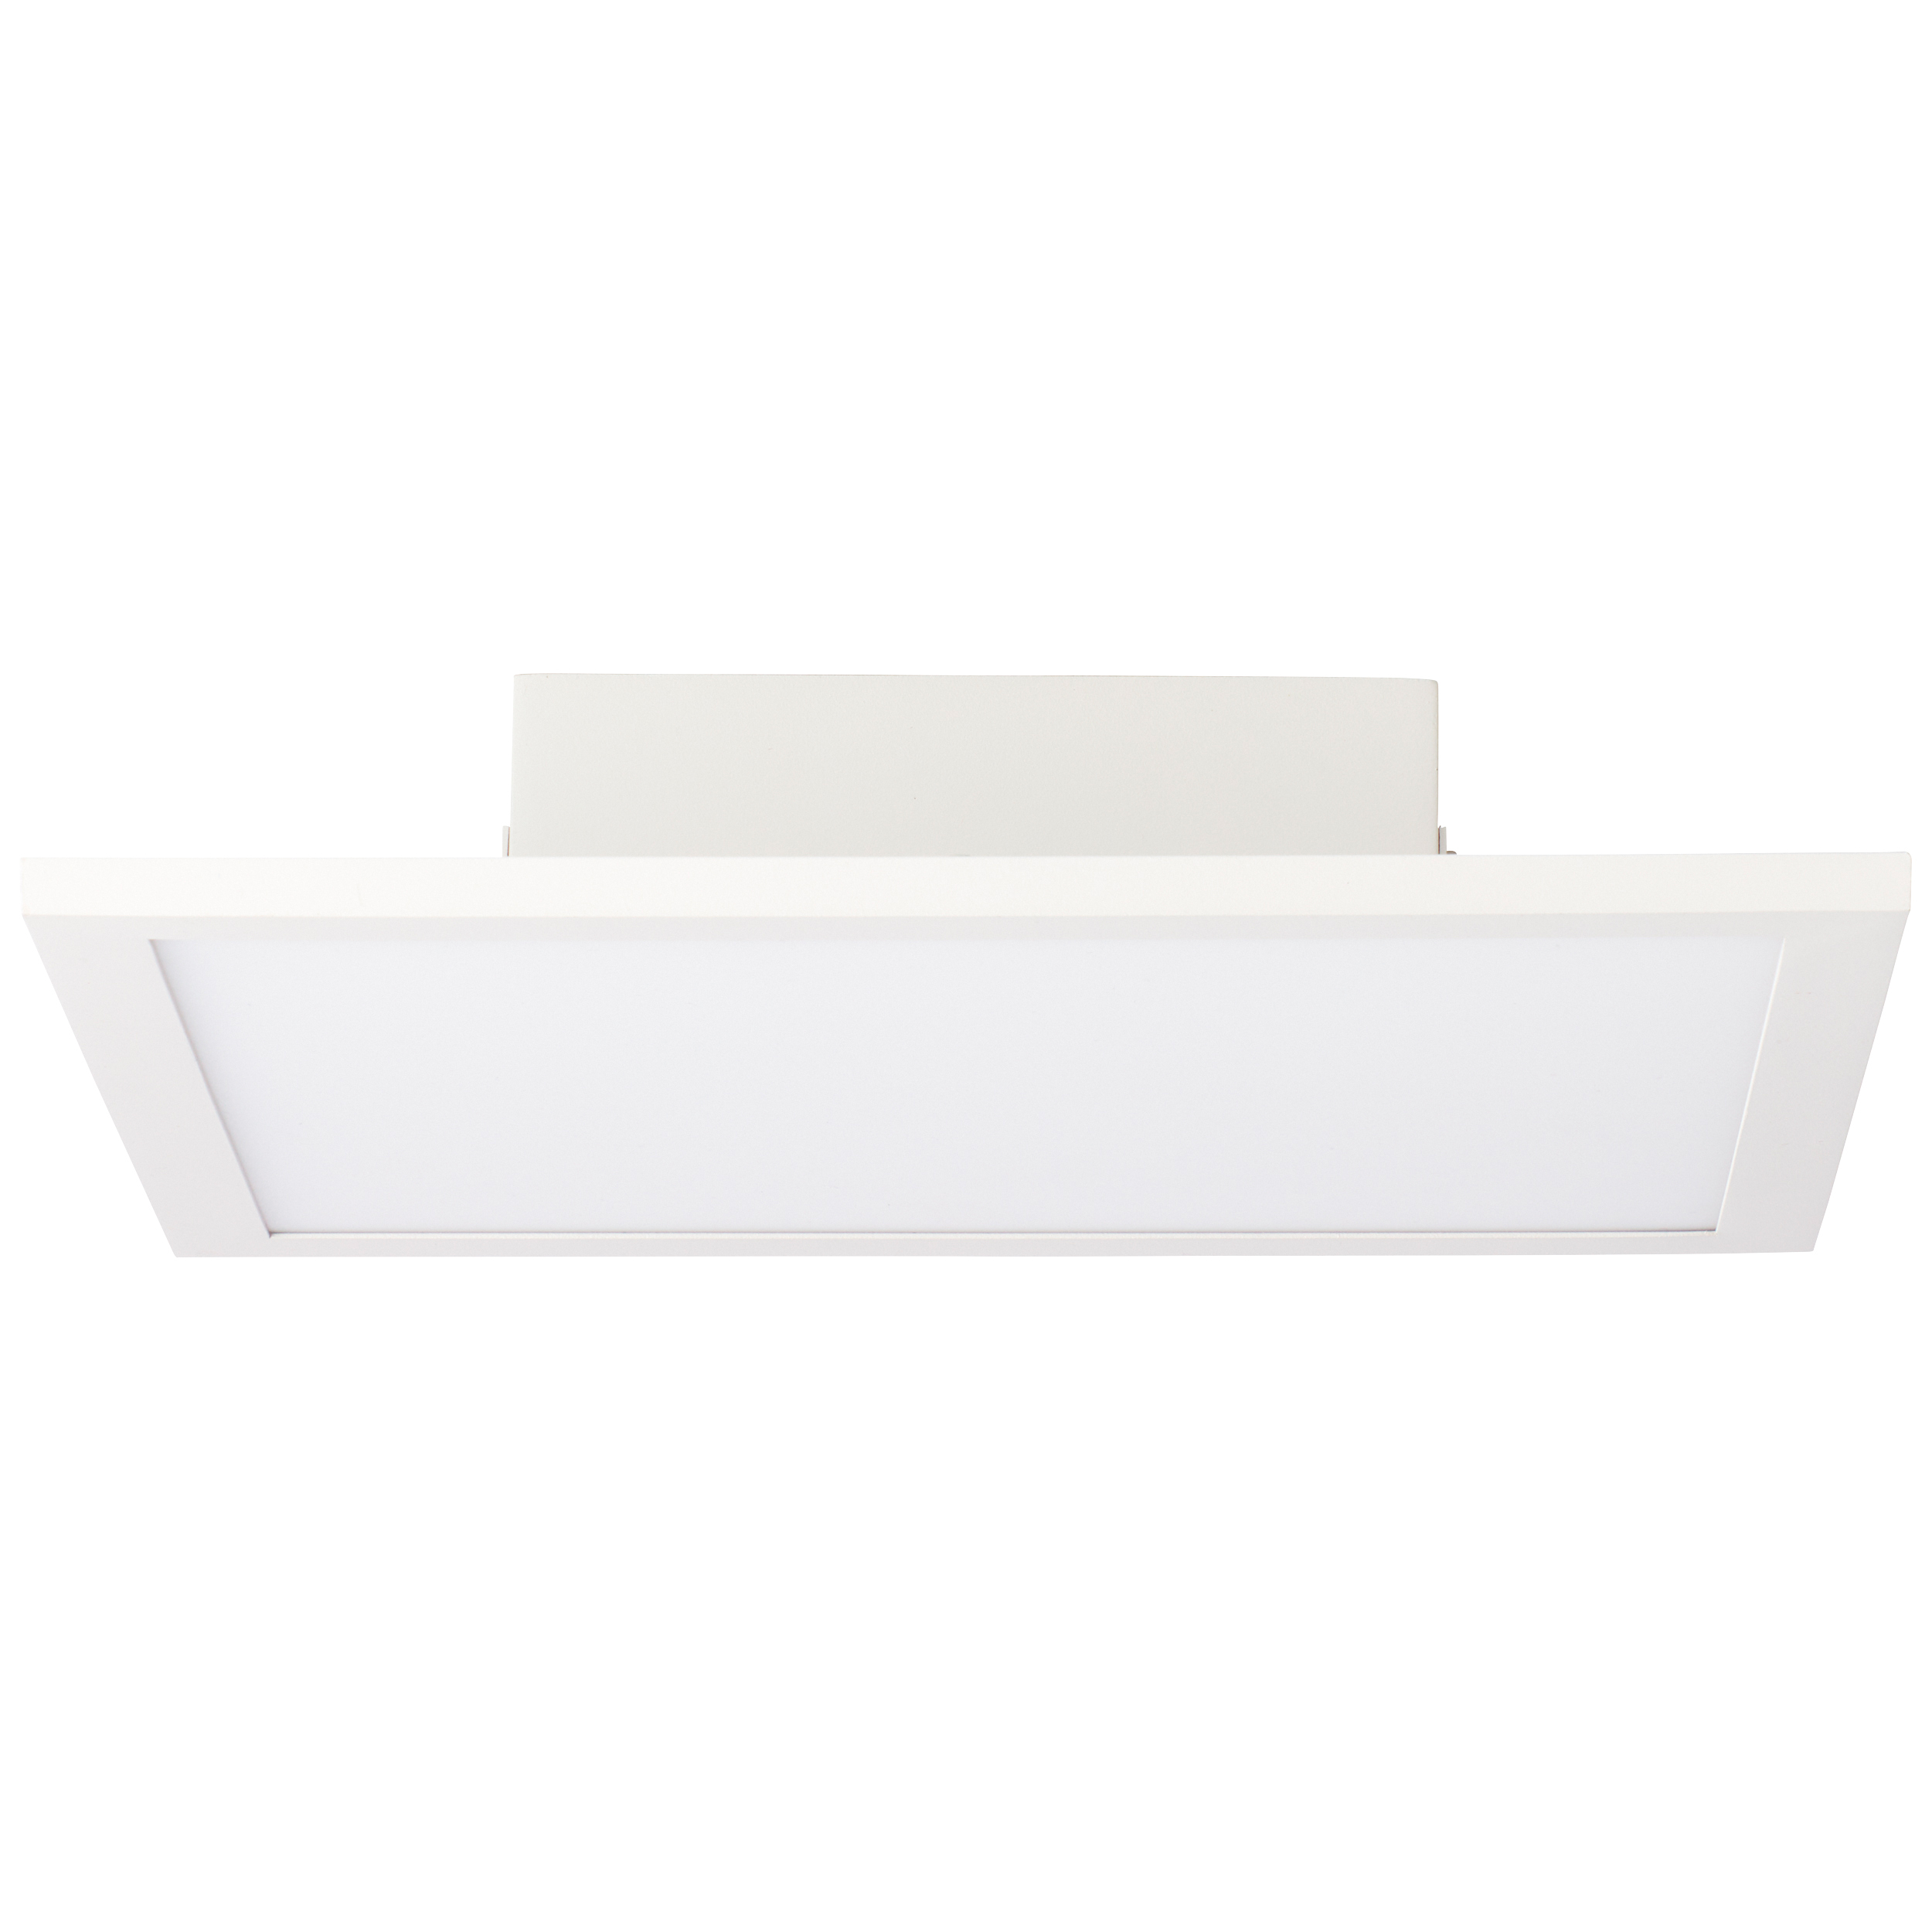 Buffi LED surface-mounted ceiling white/cold G90355A85 | 30x30cm panel white